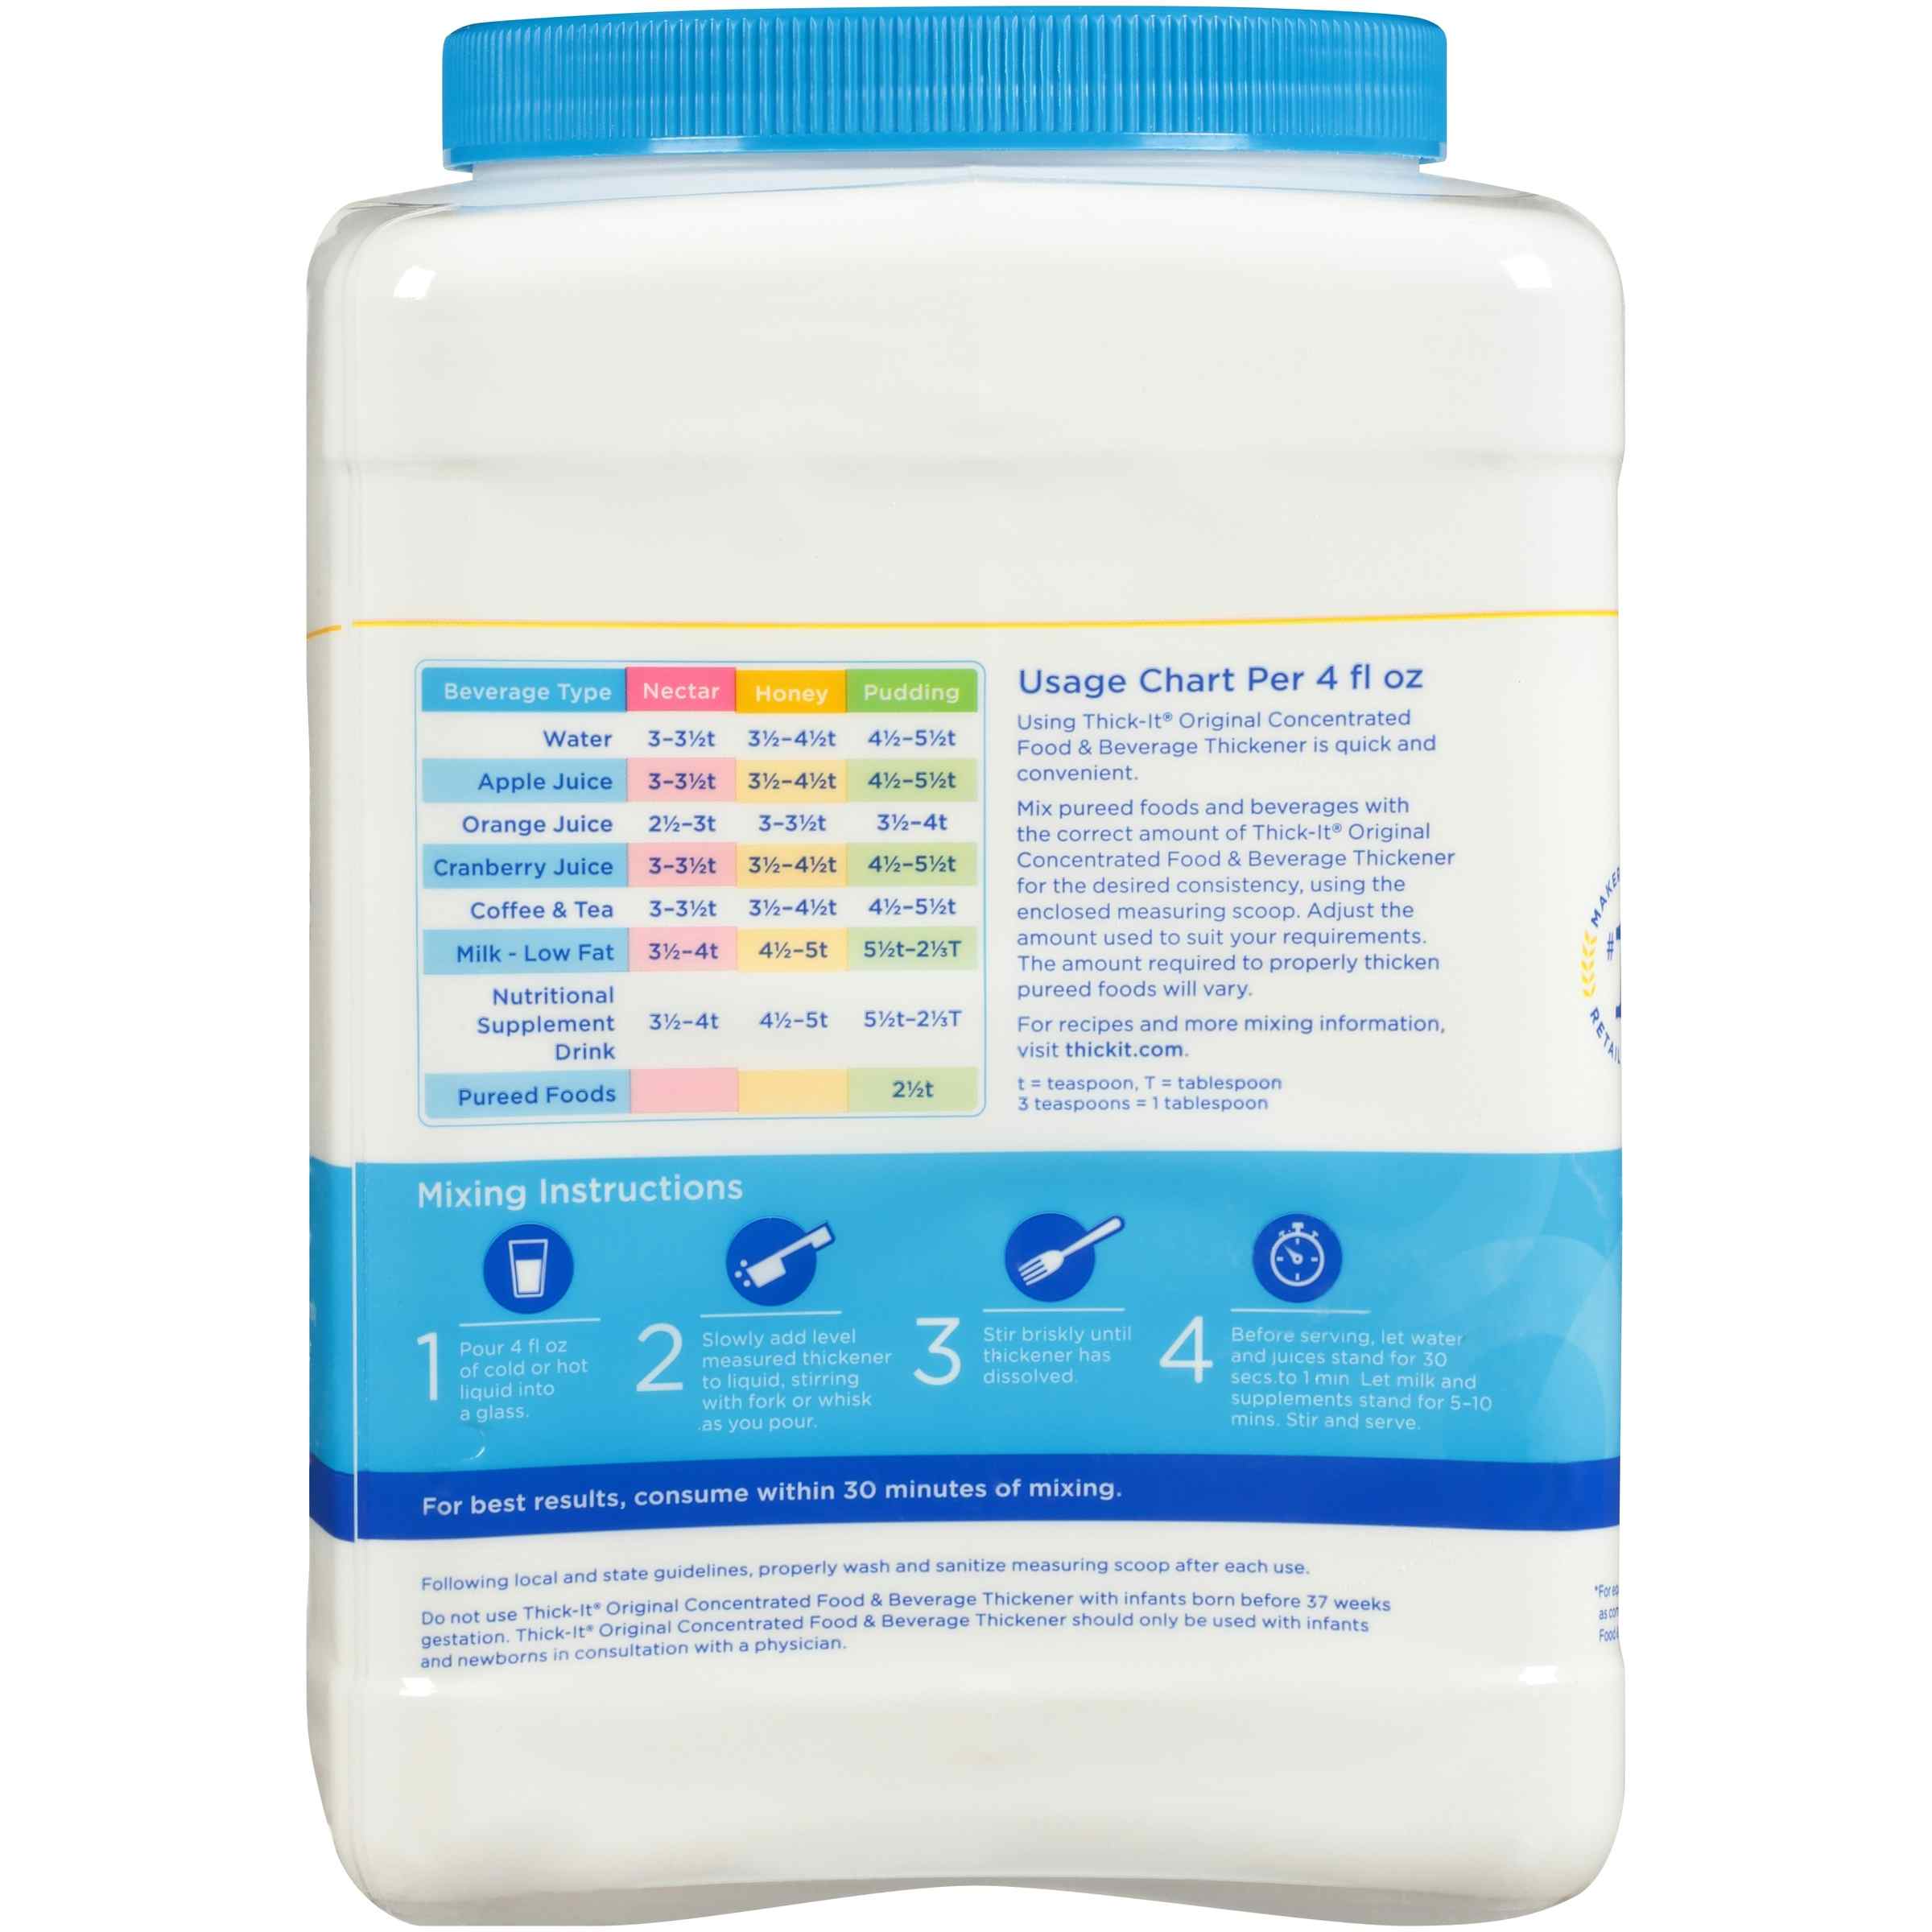 Thick-It Food and Beverage Thickener Original Concentrated, Unflavored Powder, 36 oz., Canister, J587-C6800, 1 Canister